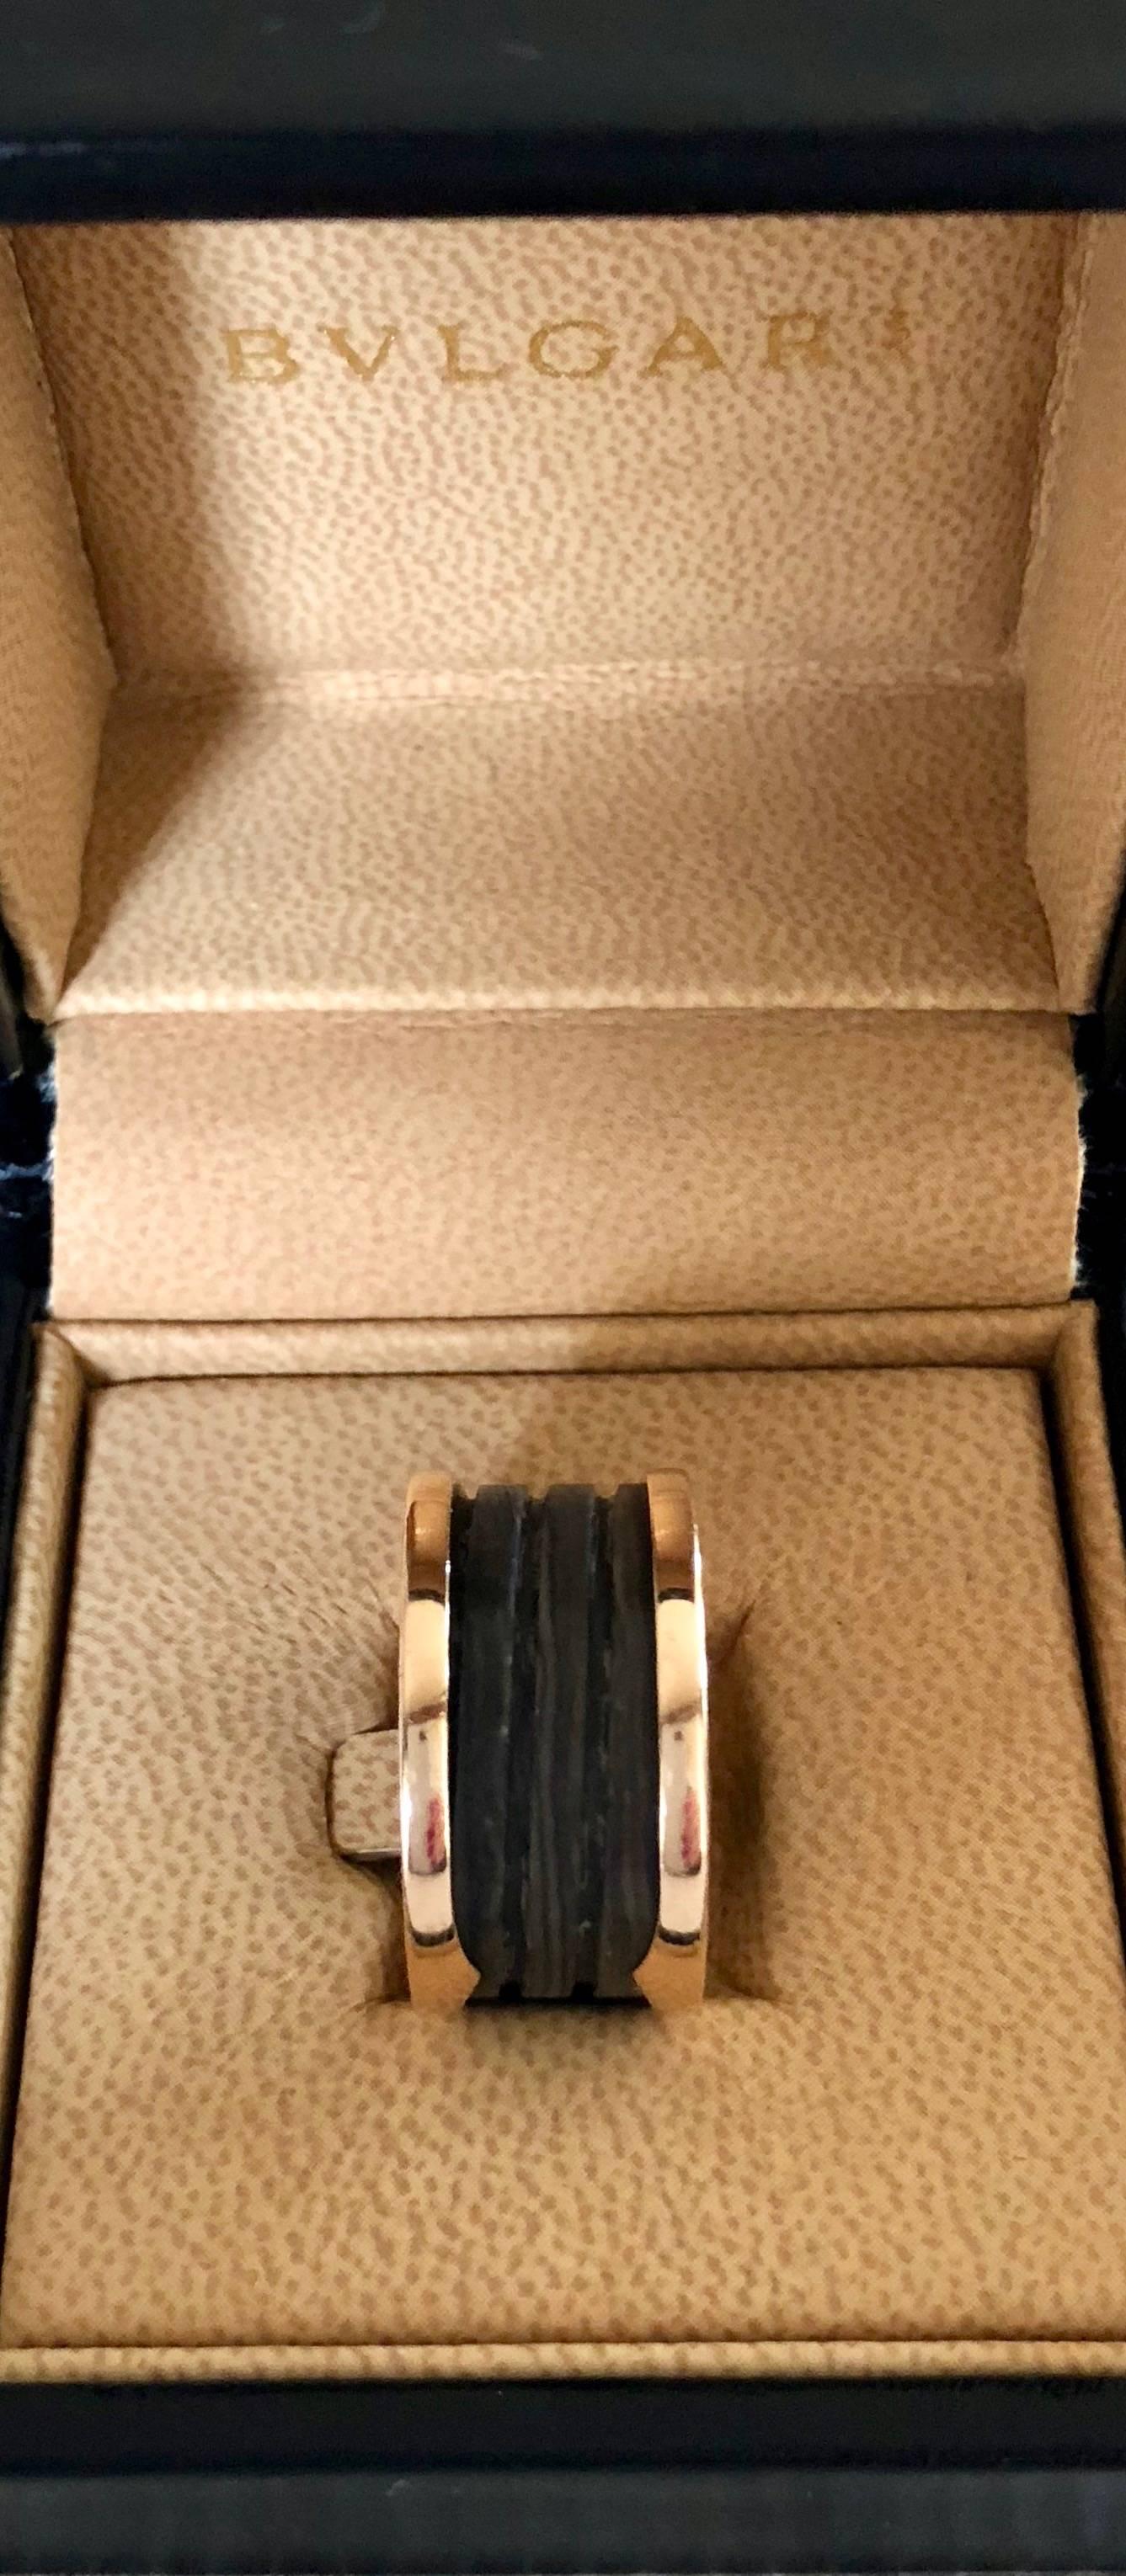 Signature style ring by Bulgari. Elegant and timeless. 

Material: Pink gold and brown marble 4-band
Size: 57
Condition: Excellent
Comes with: Original Bulgari box and certificate of authenticity

All items are subject to a strict quality control